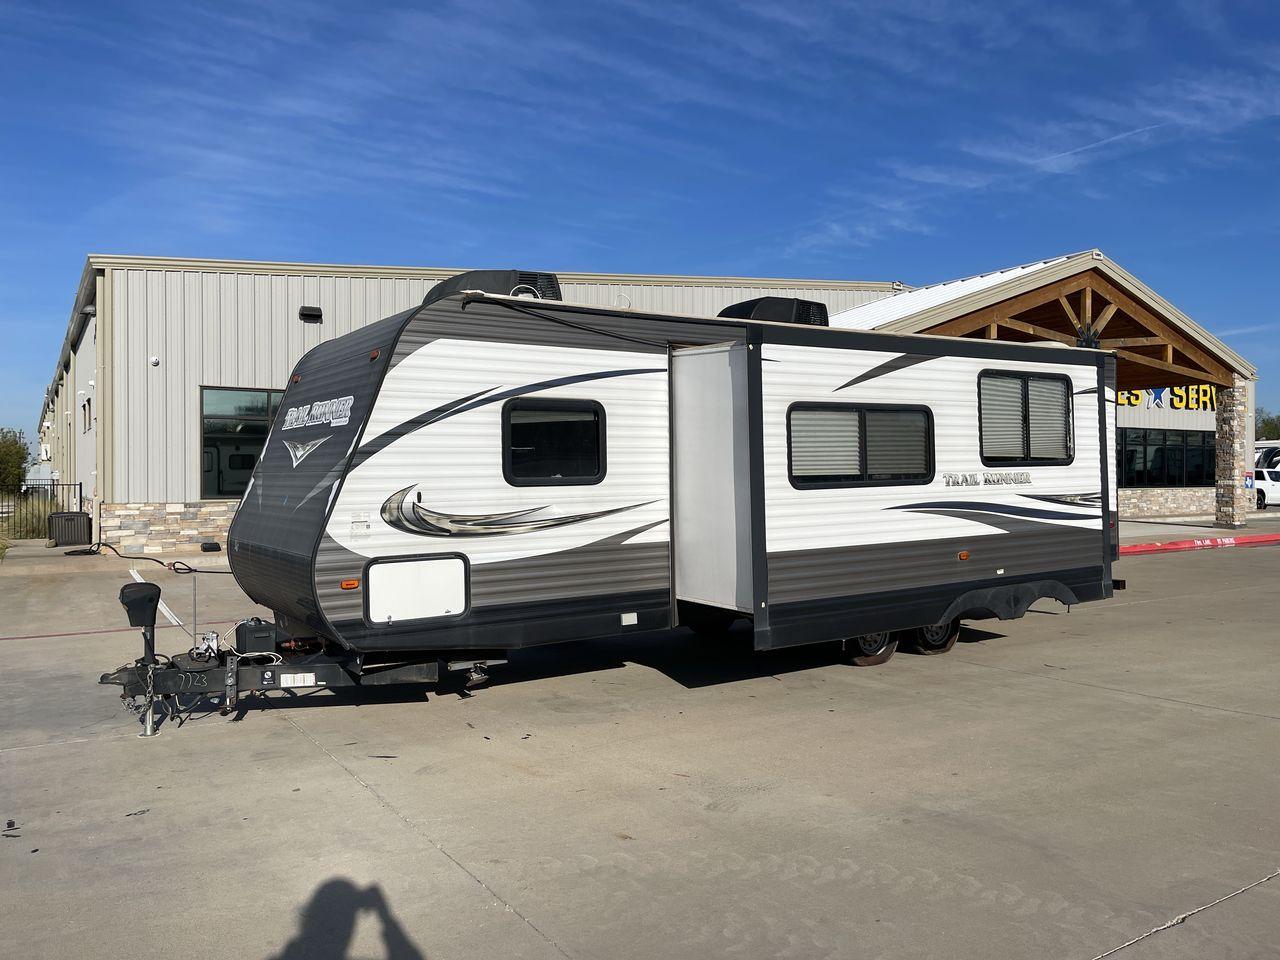 2017 HEARTLAND TRAILRUNNER 27FQBS (5SFEB3029HE) , Length: 30.58 ft. | Dry Weight: 6,081 lbs. | Gross Weight: 7,700 lbs. | Slides: 1 transmission, located at 4319 N Main Street, Cleburne, TX, 76033, (817) 221-0660, 32.435829, -97.384178 - The 2017 Heartland Trail Runner 27FQBS is a versatile and well-designed travel trailer tailored for unforgettable outdoor adventures. Measuring 30 feet in length and boasting a dry weight of 6,081 lbs, this model offers a perfect balance of spaciousness and towing convenience. Built with a durable e - Photo #24